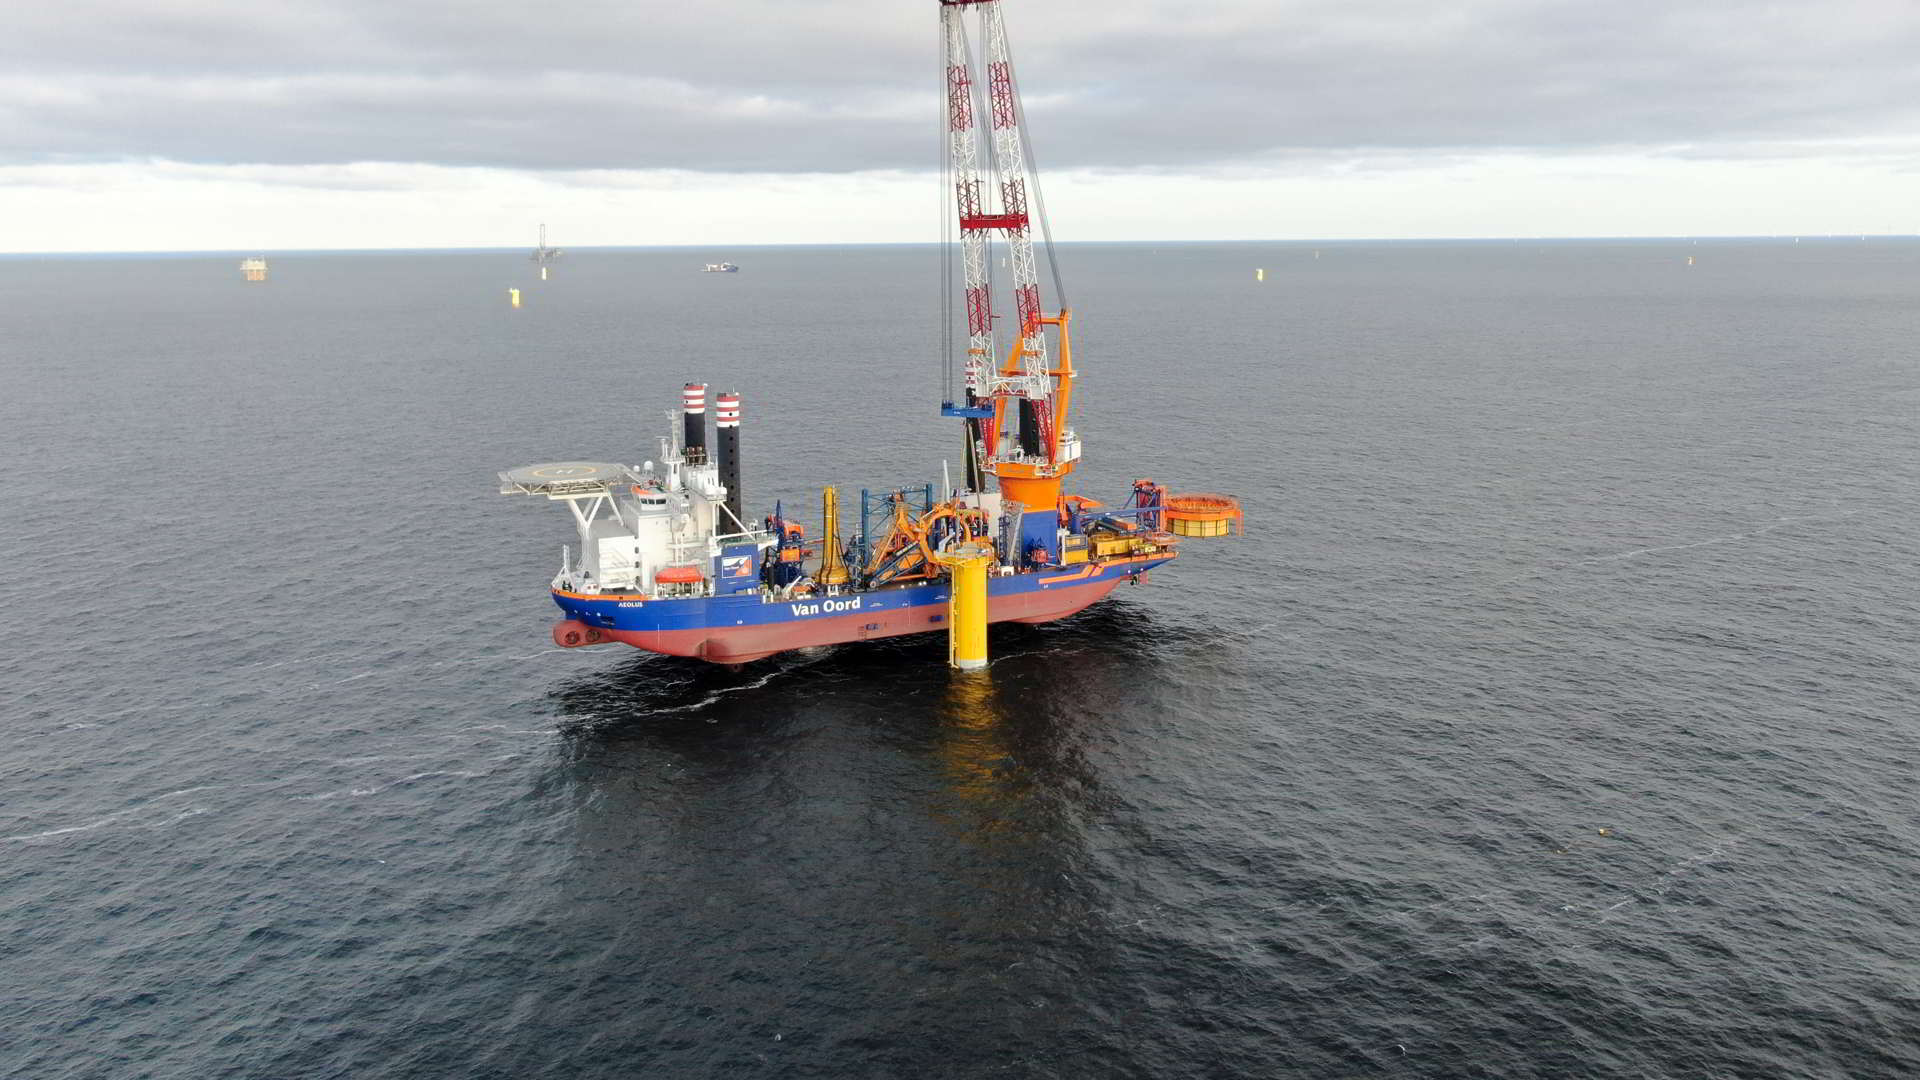 A photo of the foundation installation at the Borssele V offshore wind farm site in the Netherlands